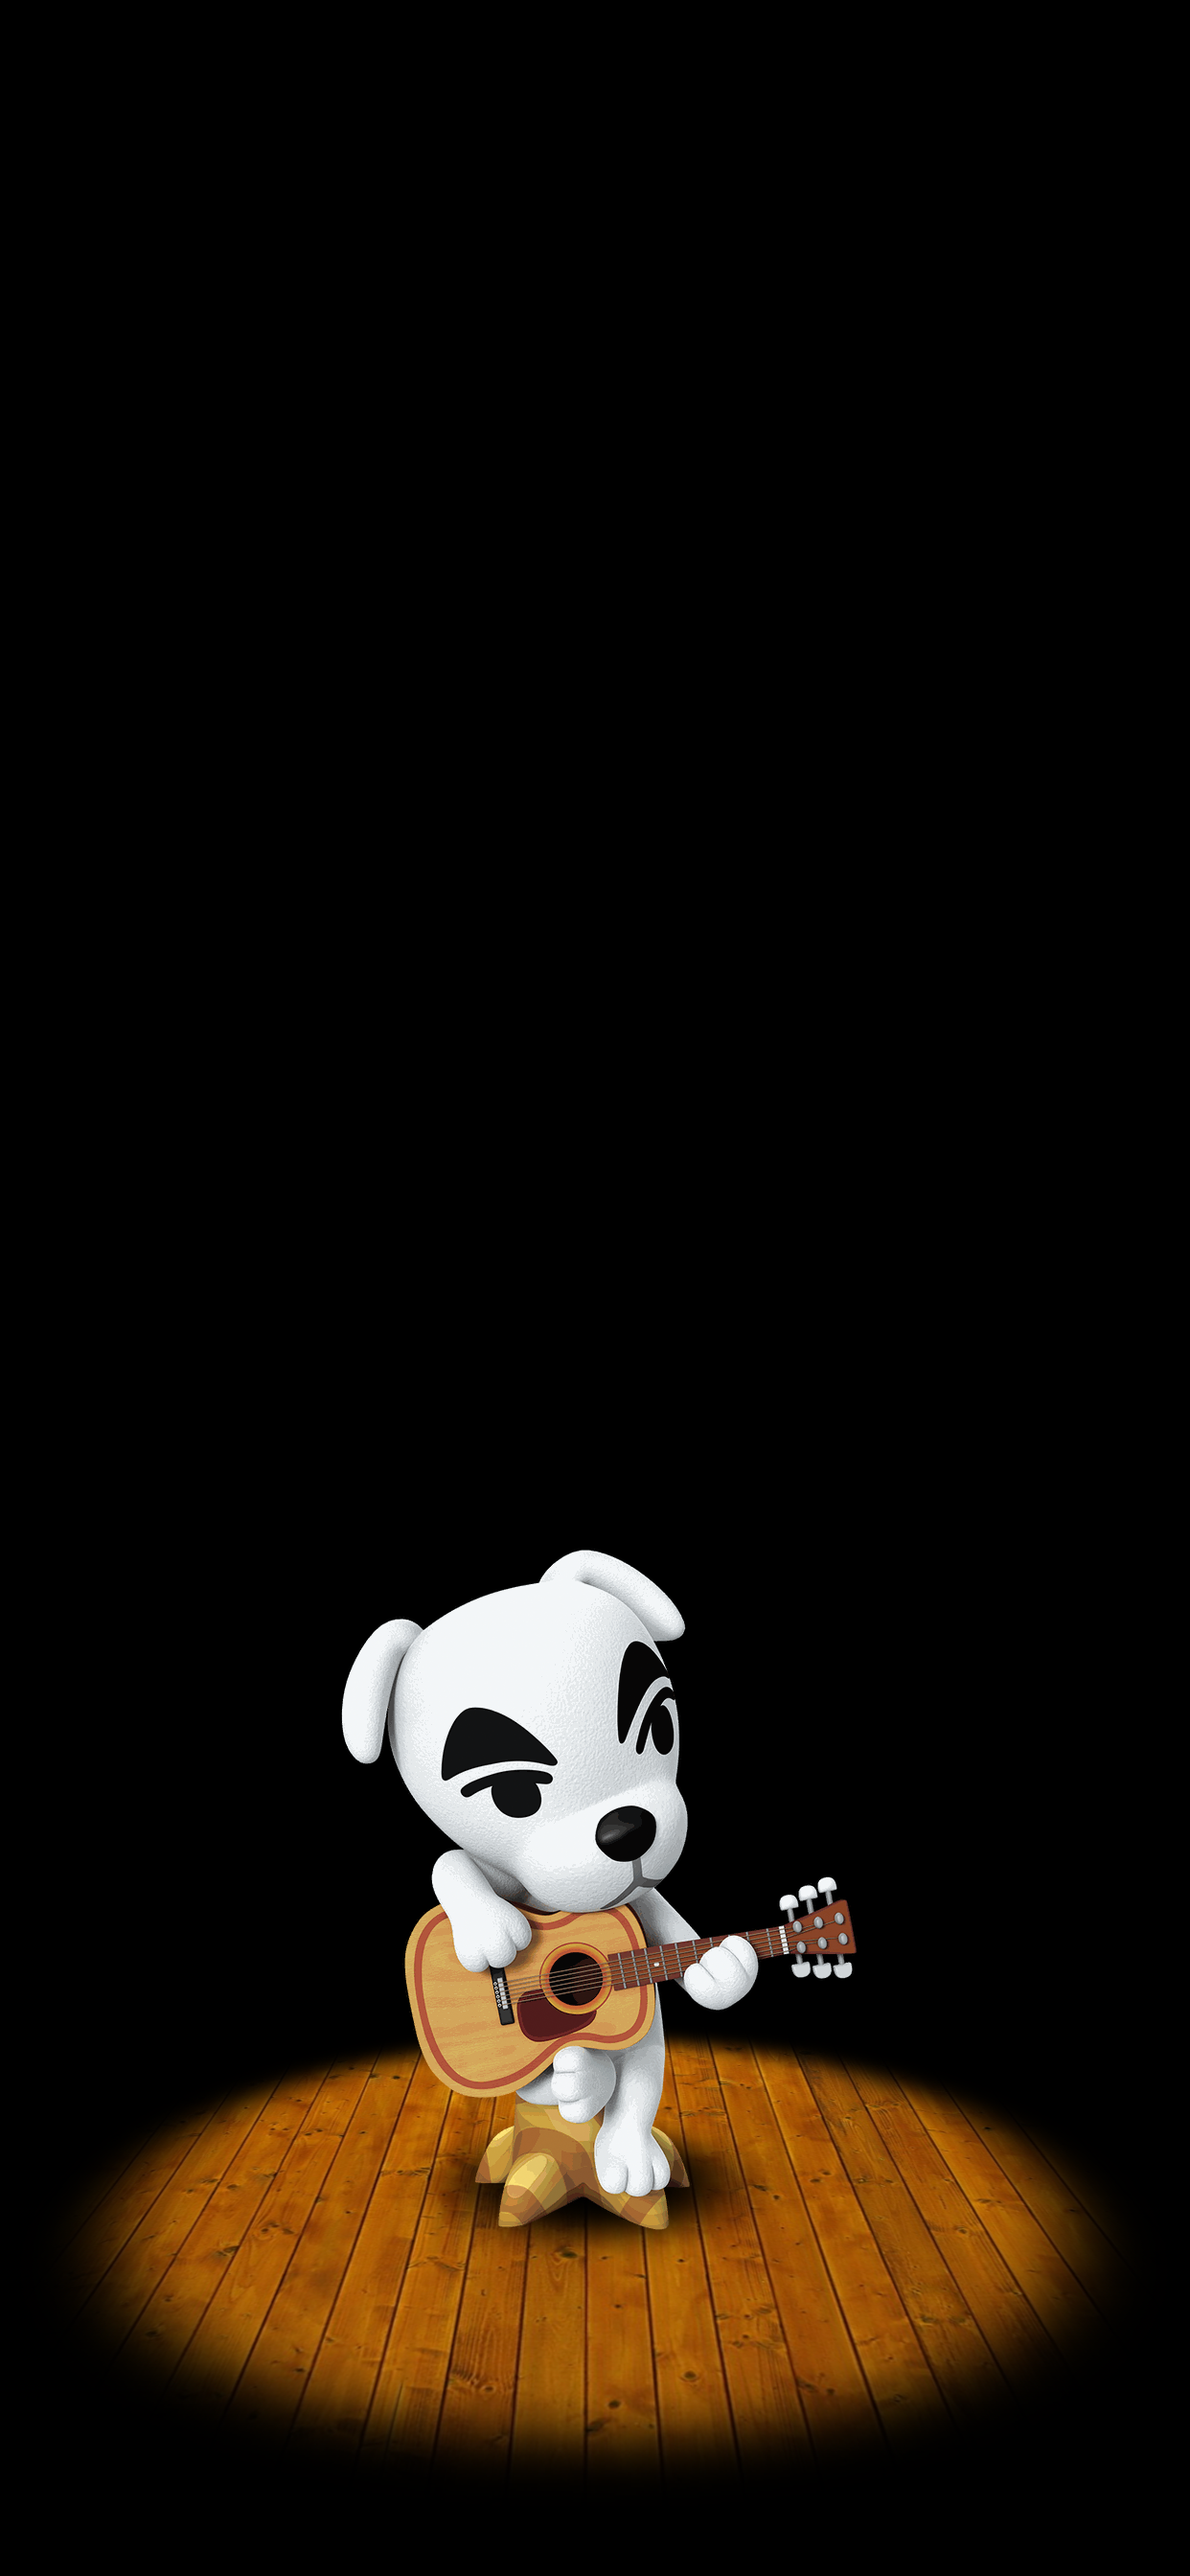 My first Animal Crossing wallpaper for AMOLED phones was a hit, so